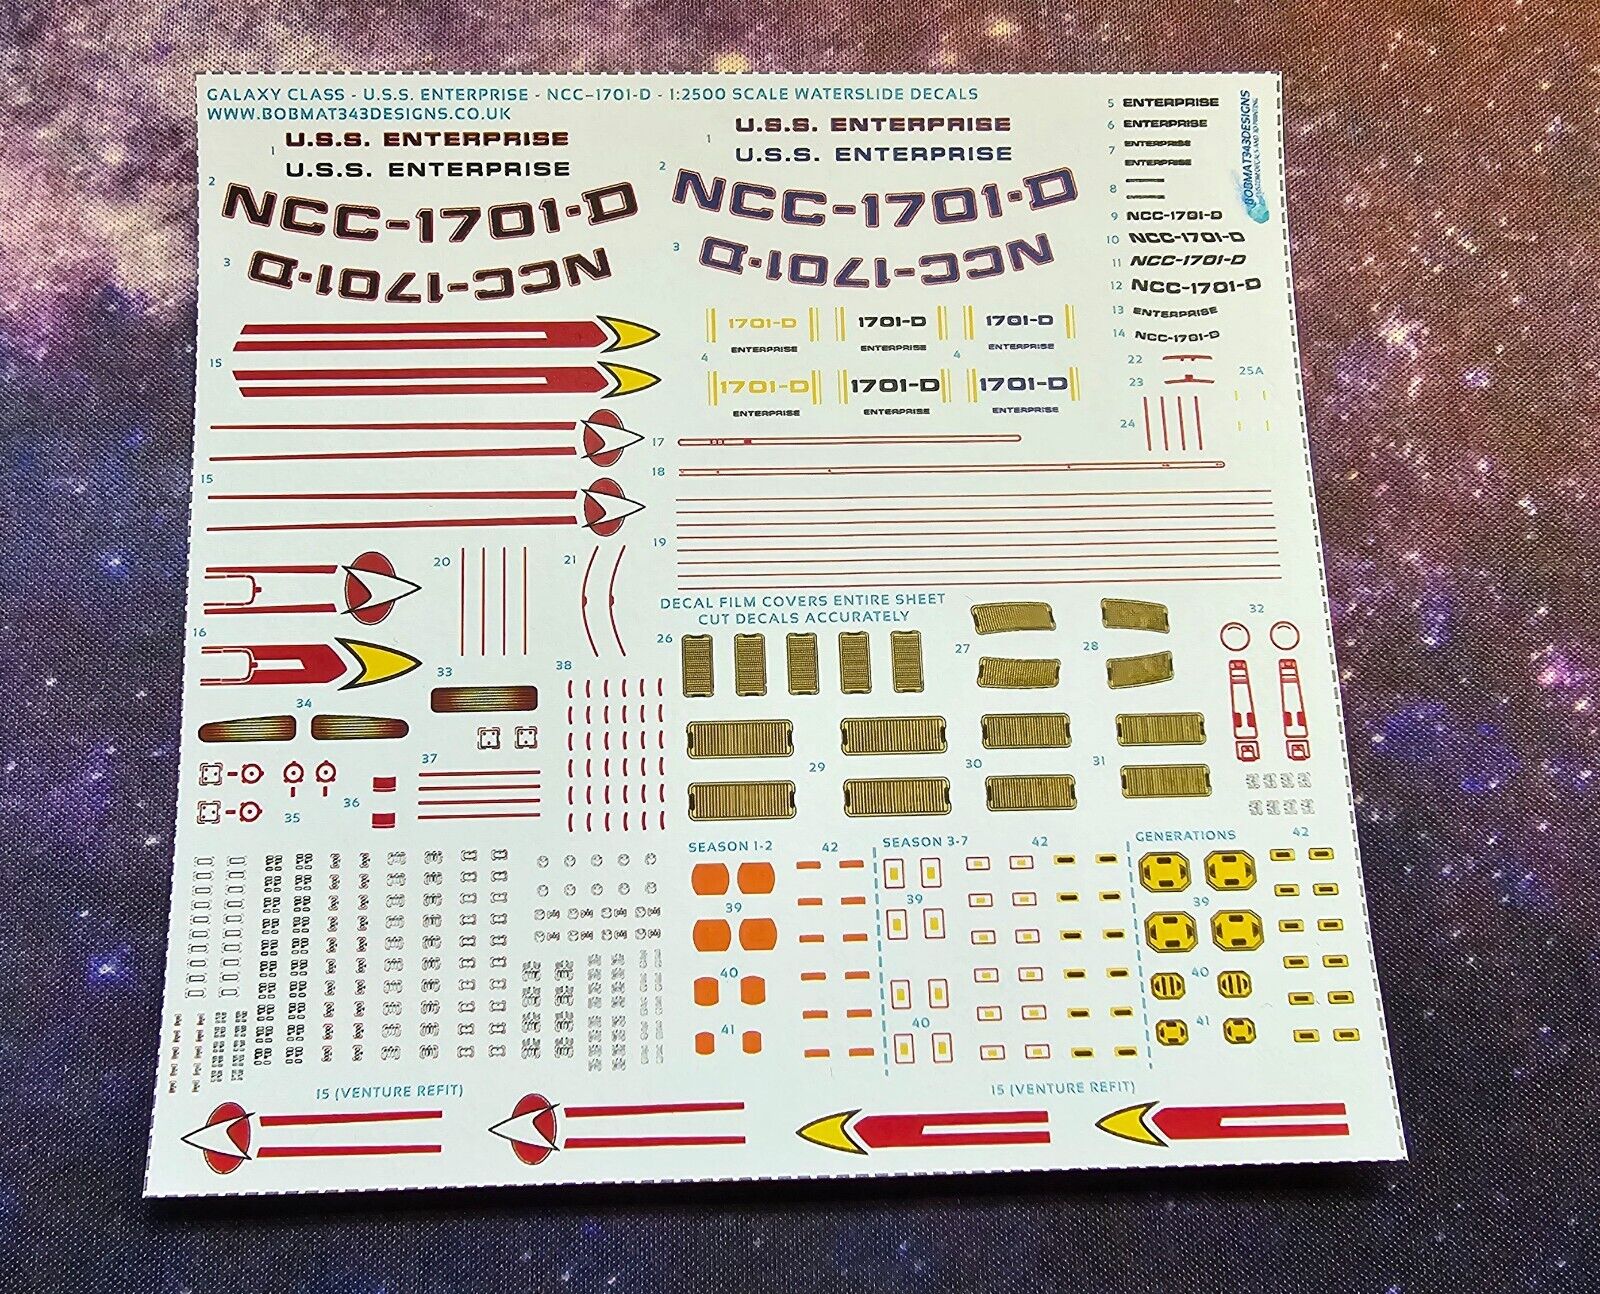 Waterslide Decals for 1:2500 Scale GALAXY CLASS U.S.S. ENTERPRISE-D